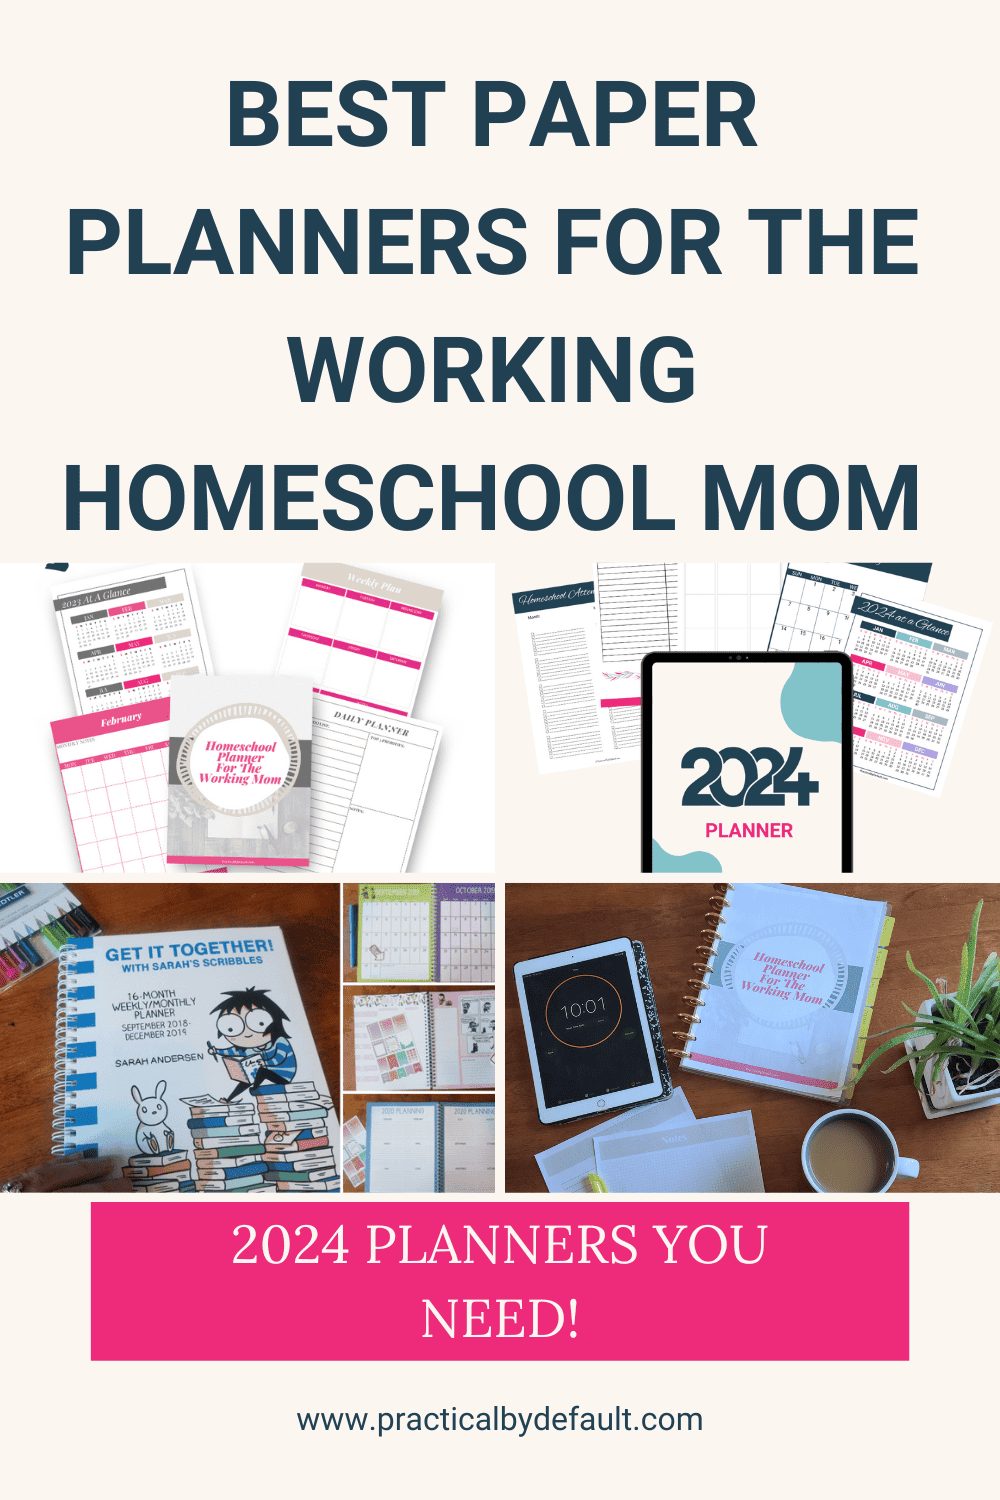 Our 10 Best Tips for Homeschool Organization - Avery